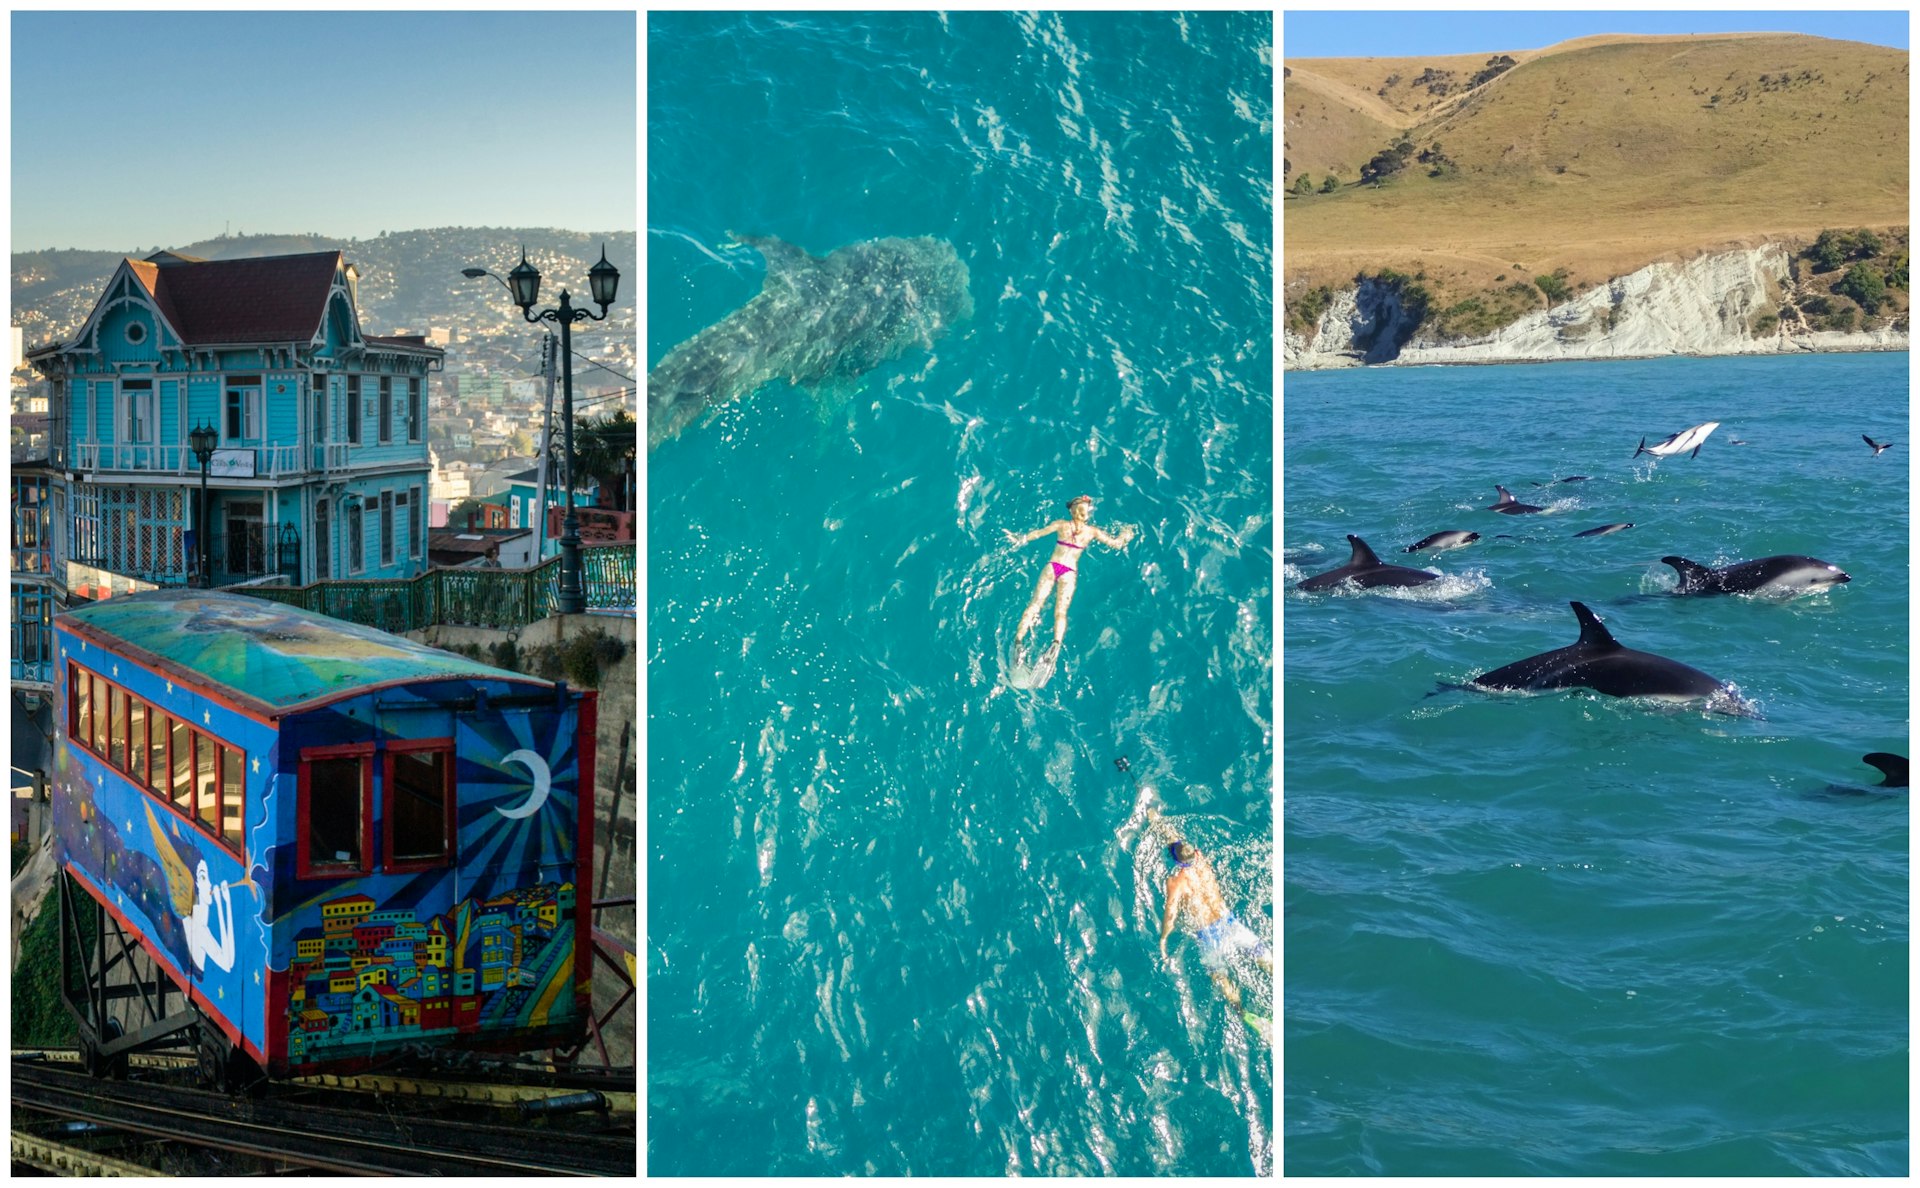 Colorful buildings in Santiago, Chile; swimmers in the water of Mafia Island, Tanzania; dolphins in South Island, New Zealand